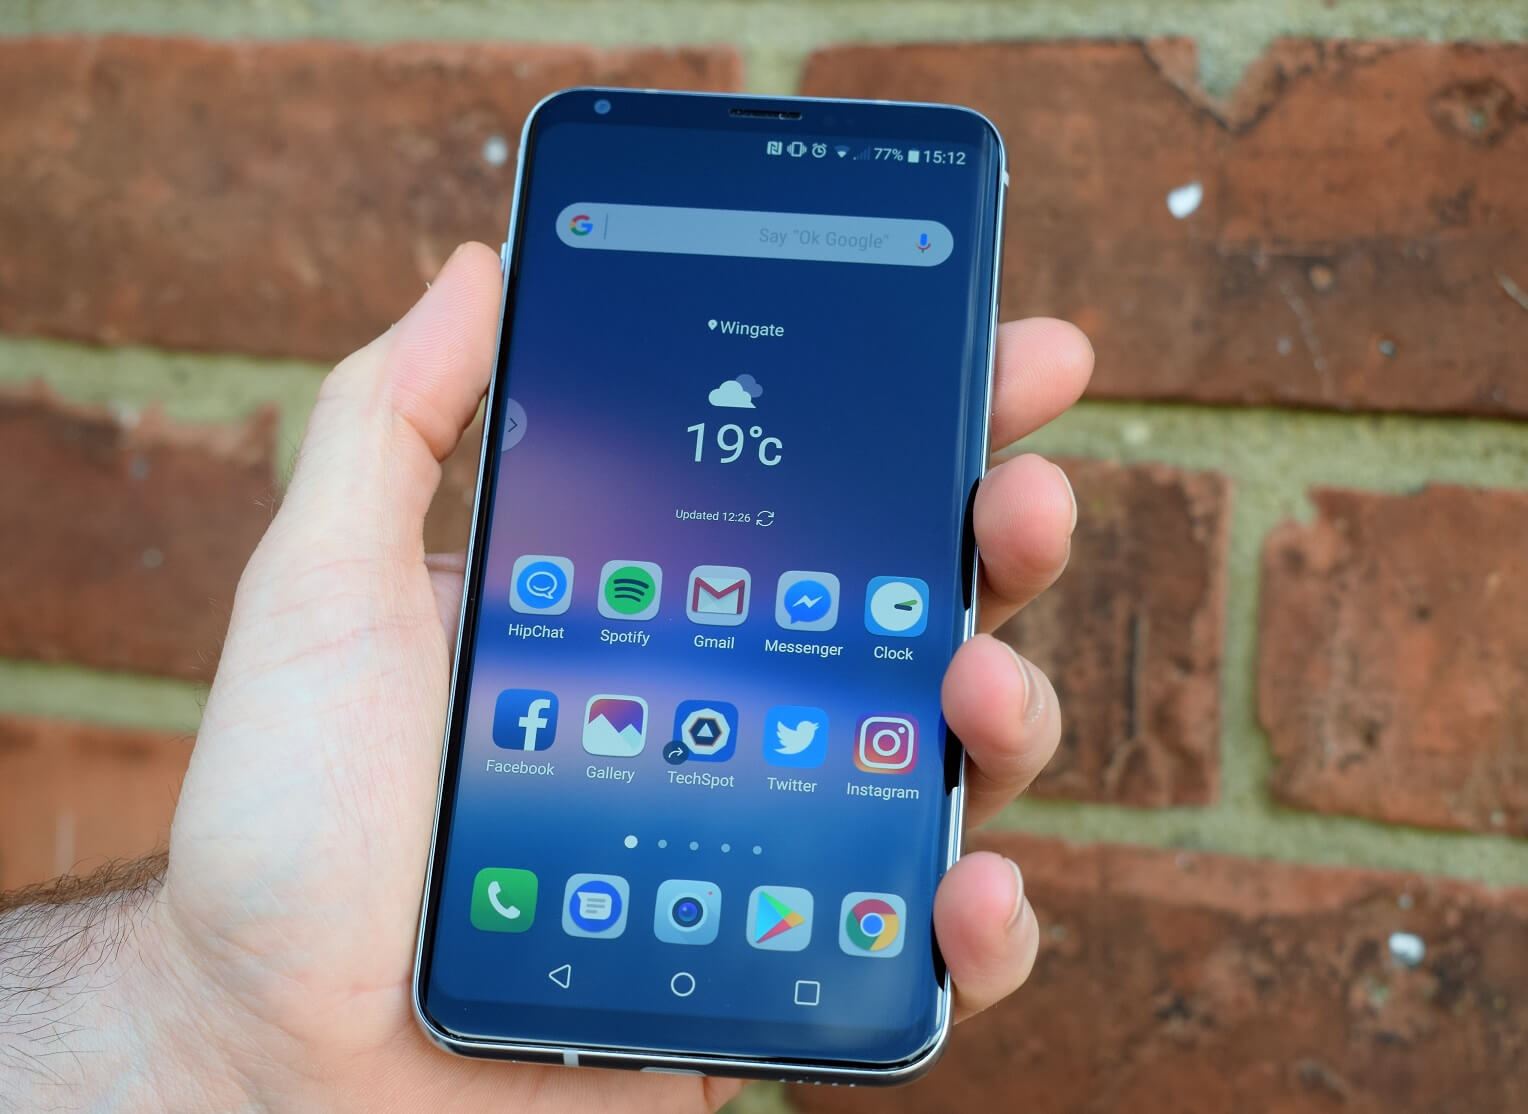 LG V30 hands-on: Believe the hype